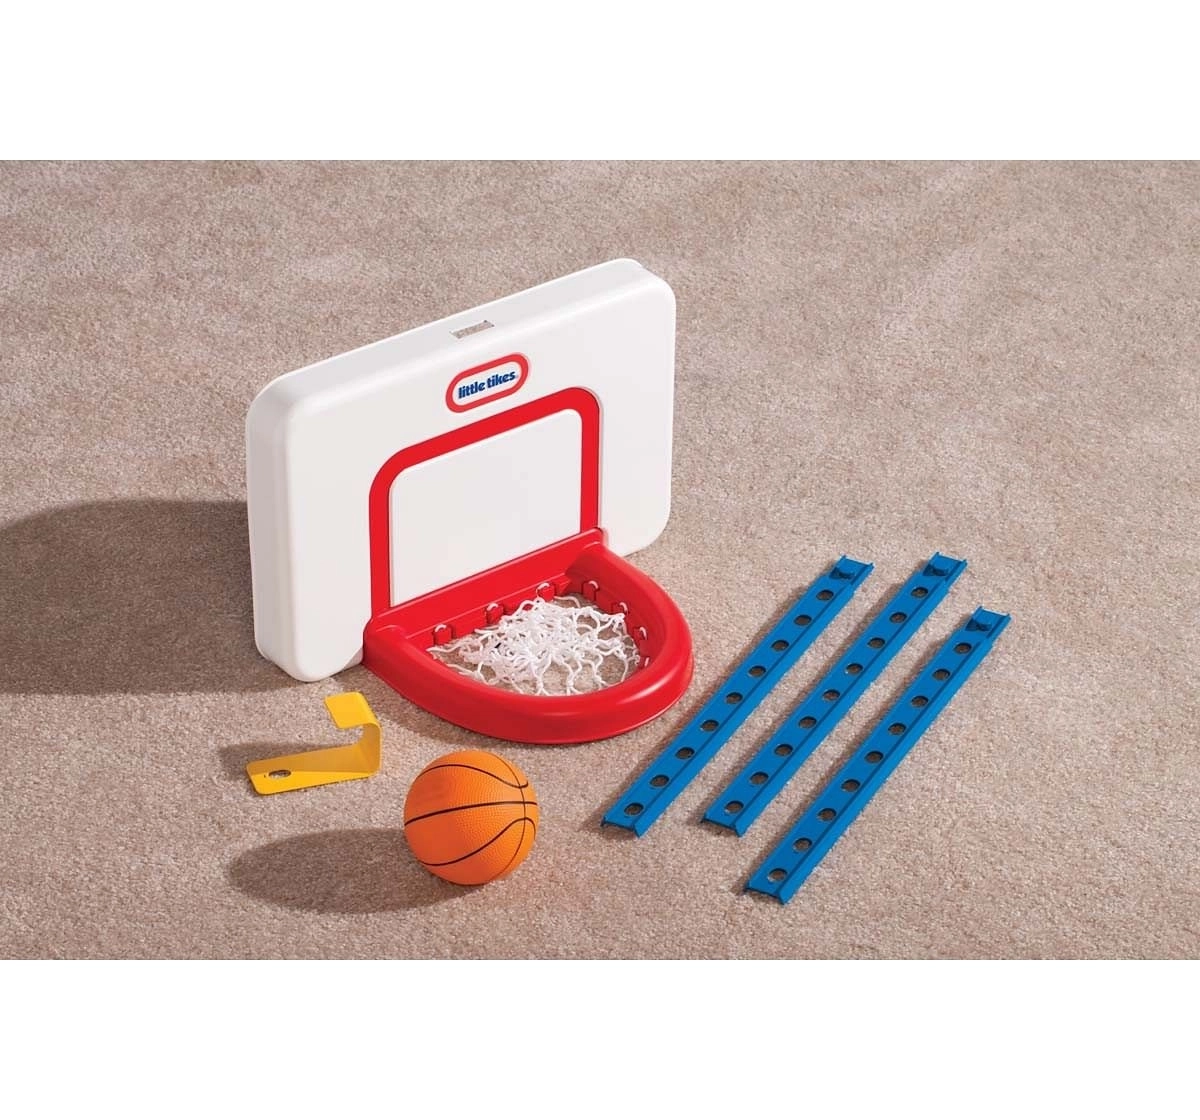 Little Tikes Attach 'N Play Basketball Early Learner Toys for Kids Age 3M+